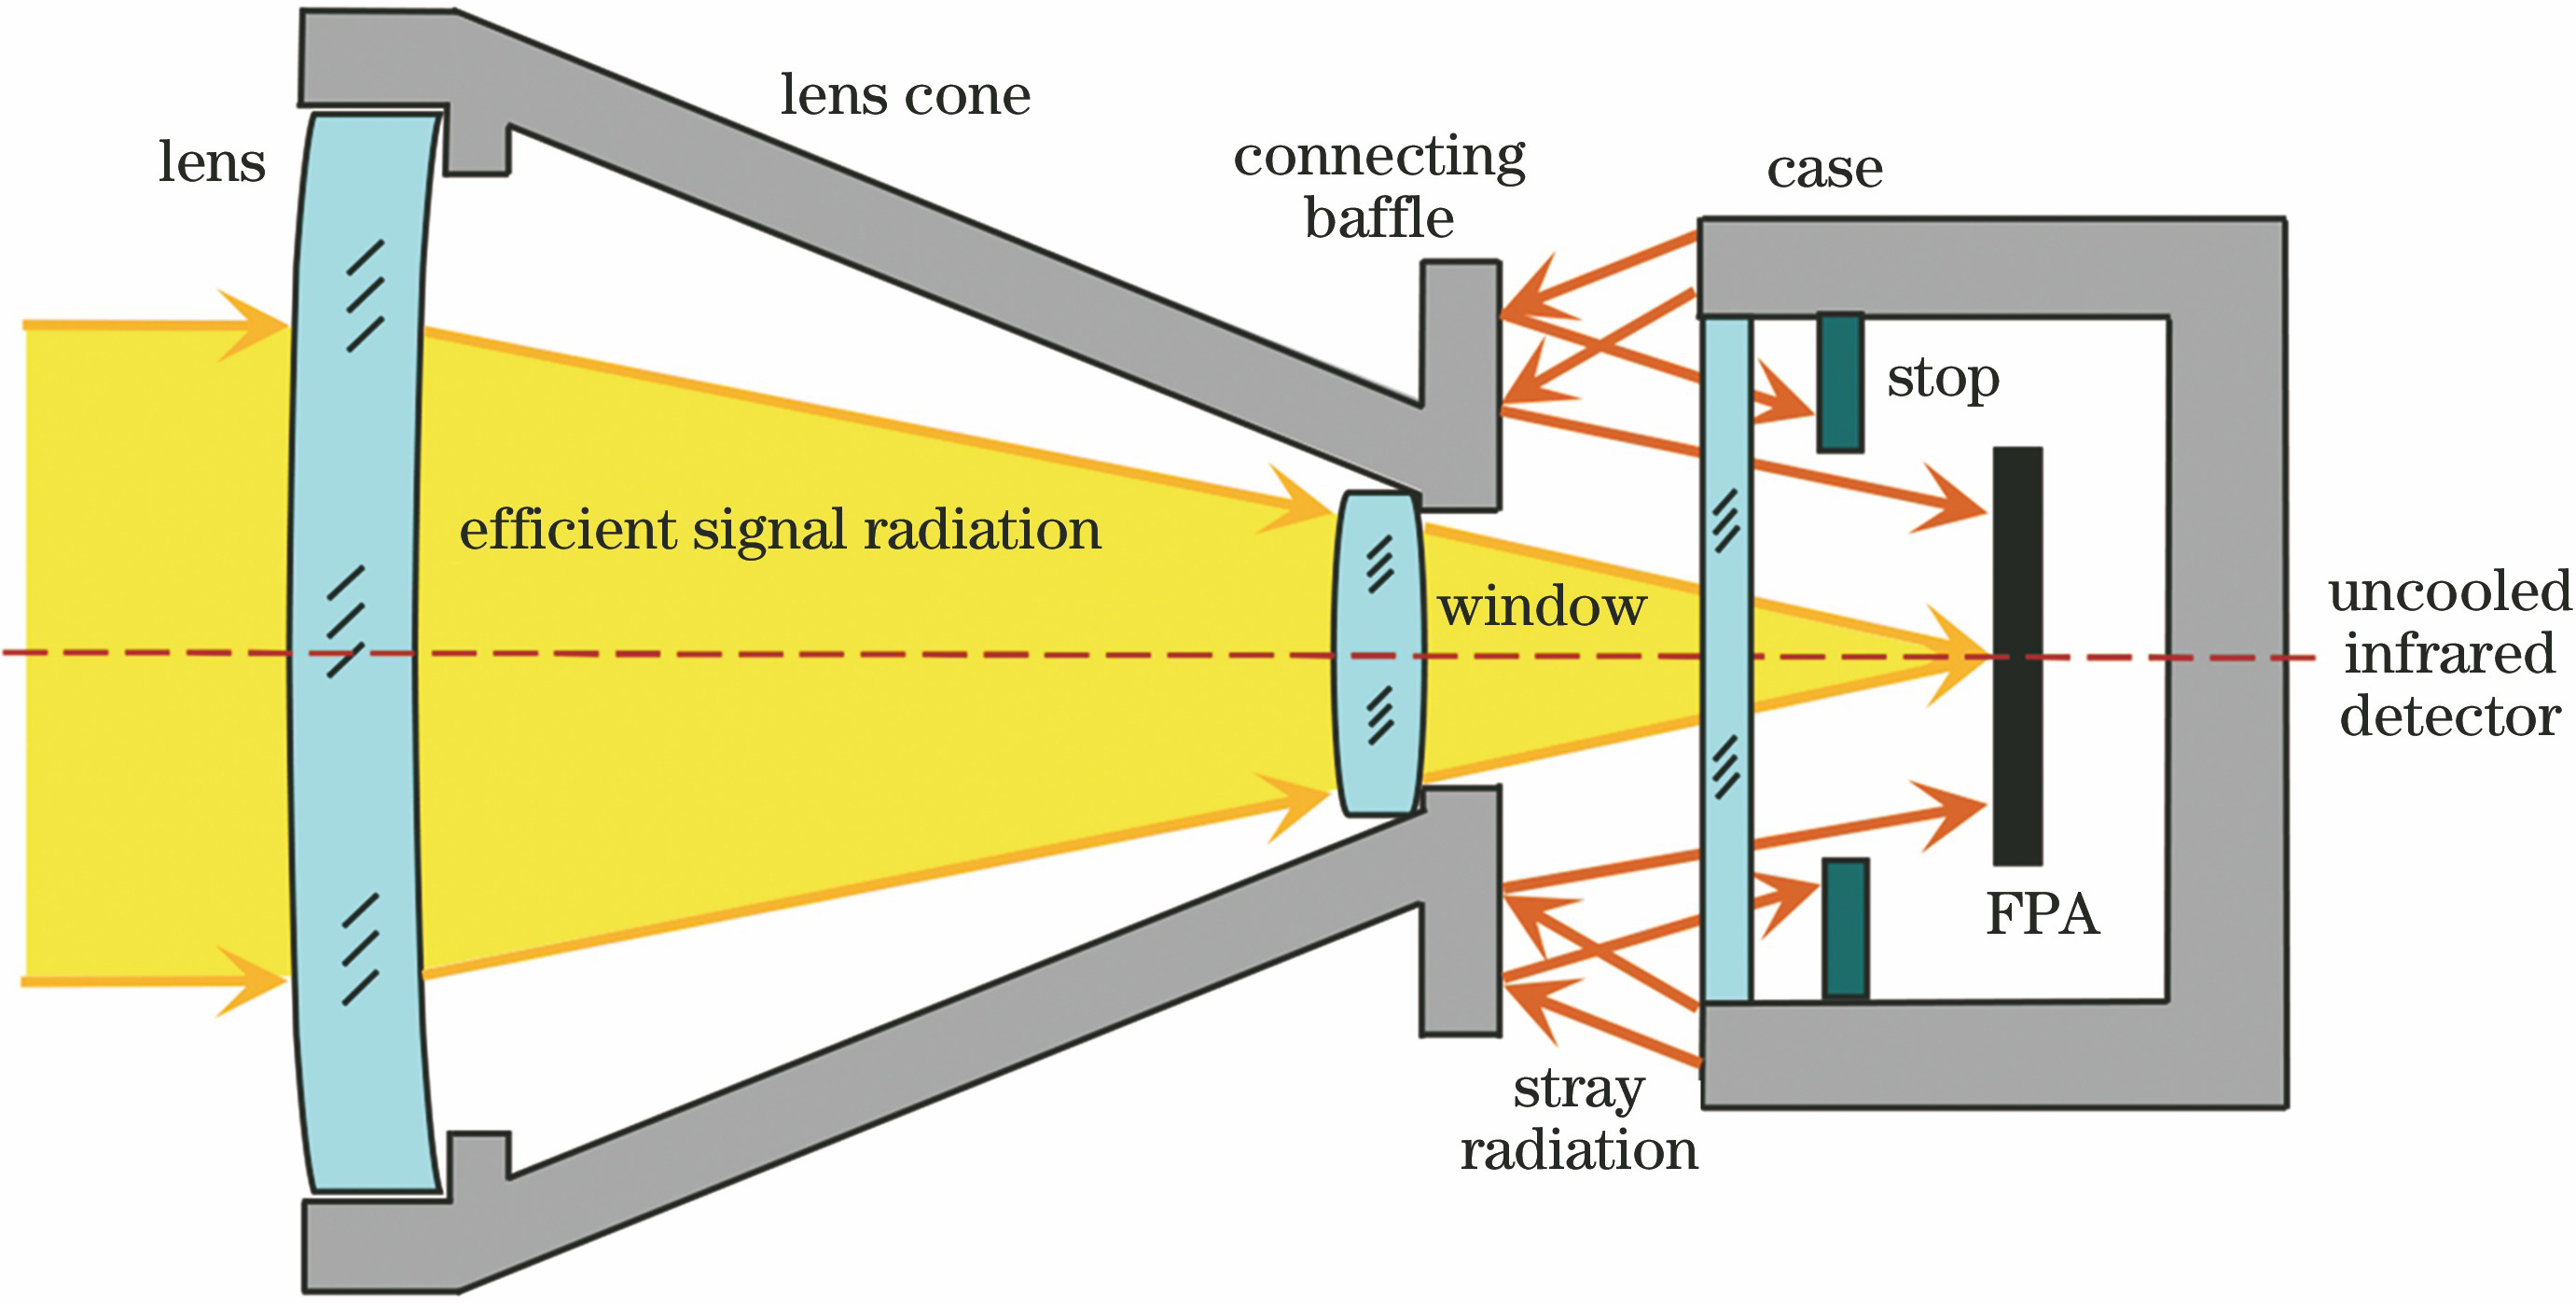 Schematic of stray radiation and stop aperture of uncooled infrared detector